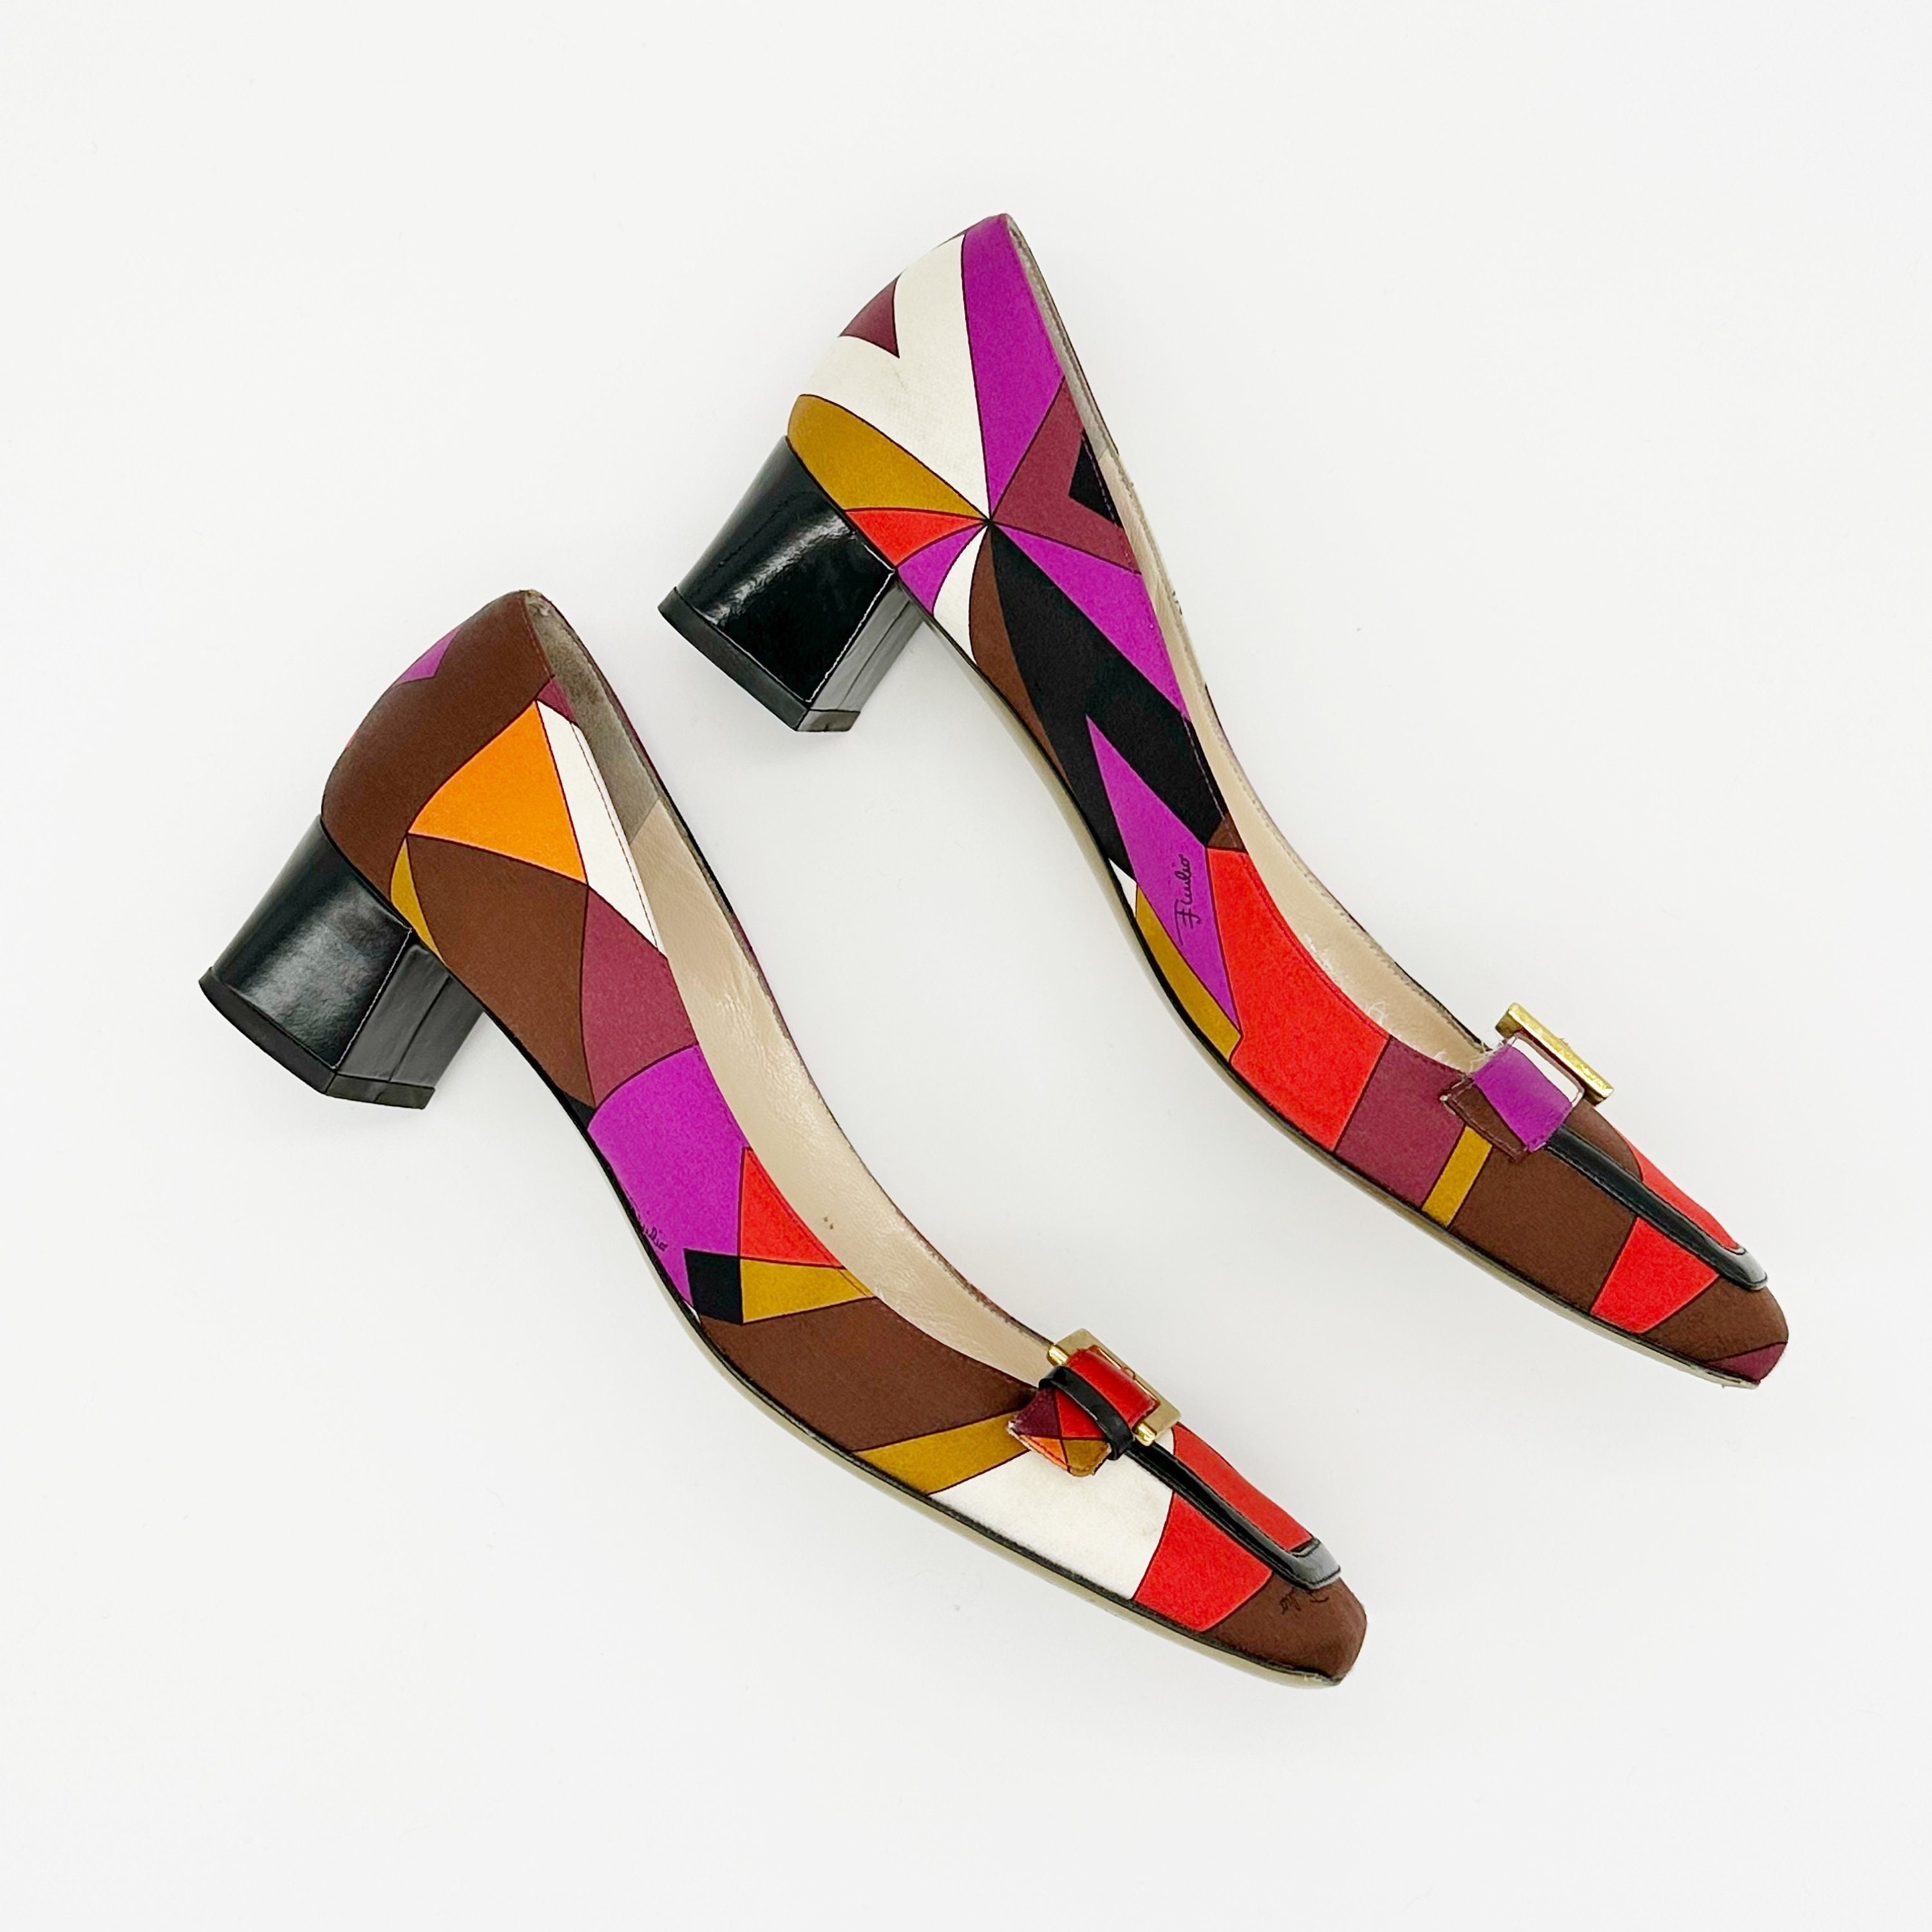 EMILIO PUCCI: shoes with abstract print - Multicolor  Emilio Pucci shoes  9R0046G0061 online at